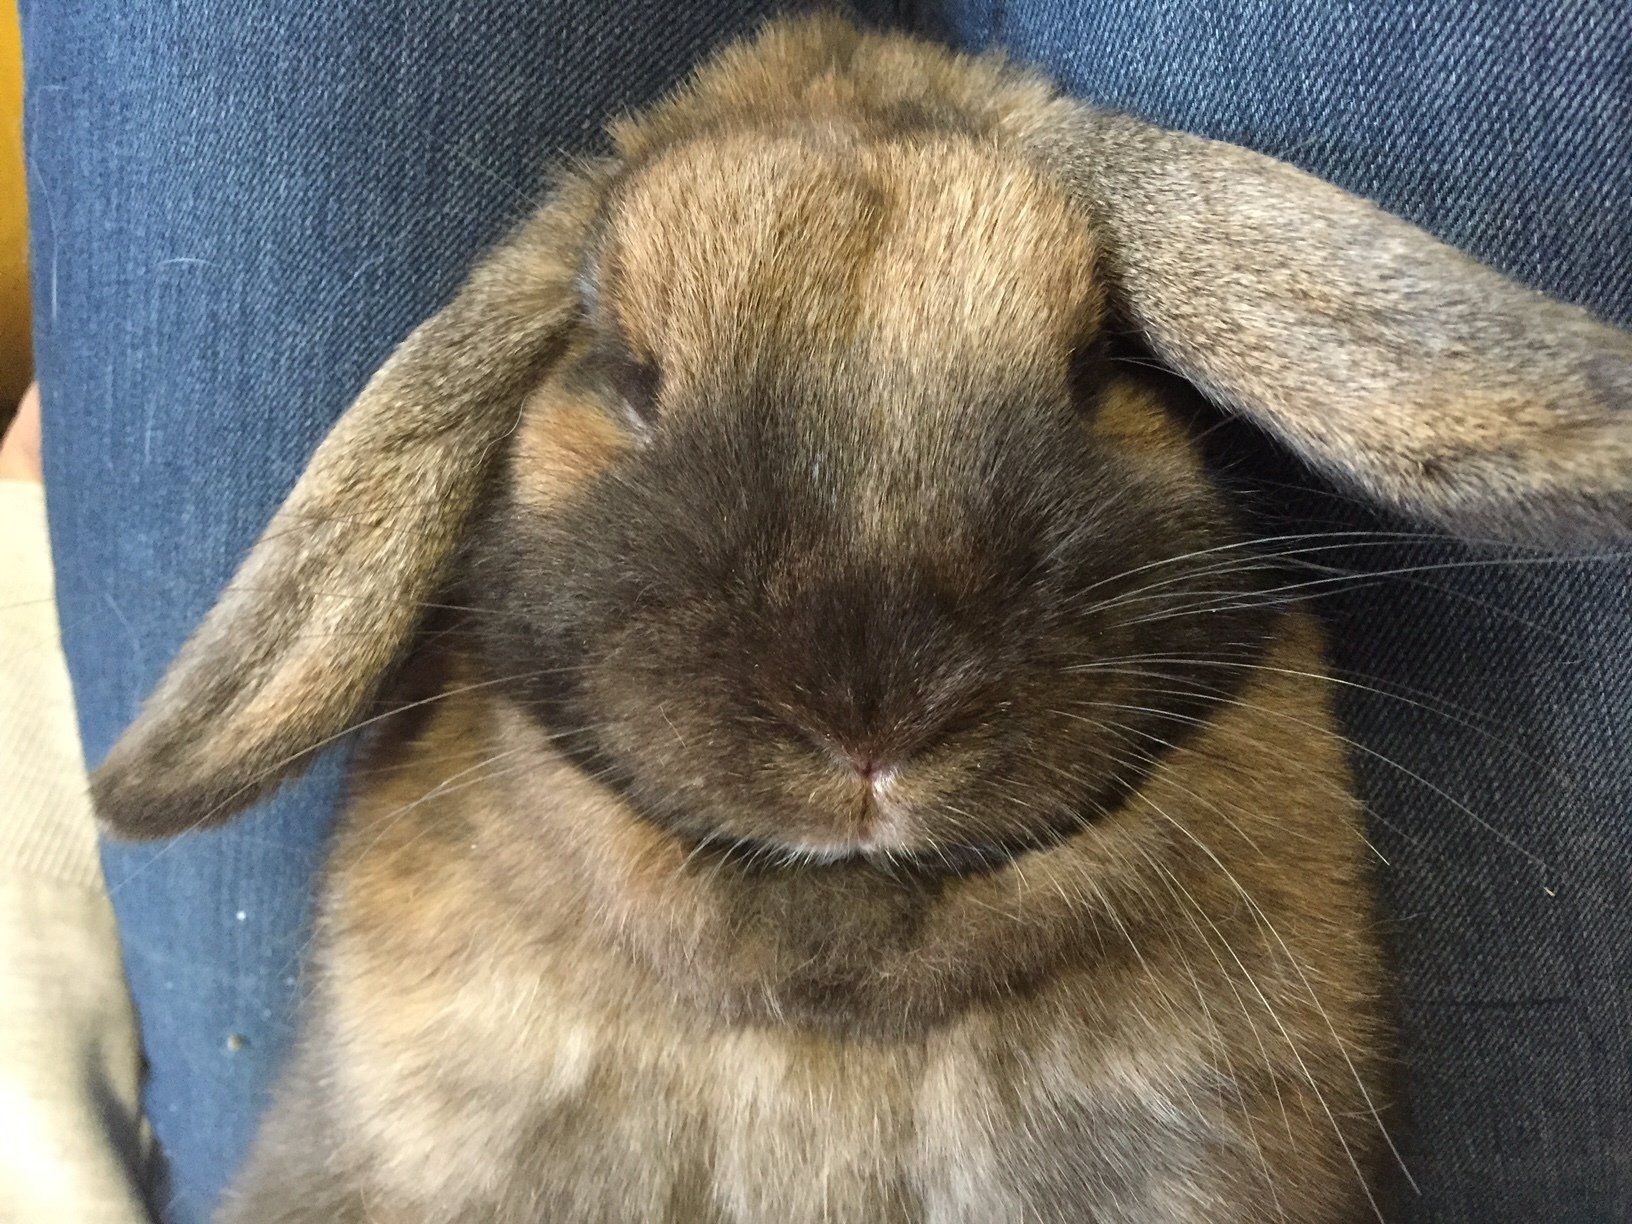 A lop-eared brown rabbit